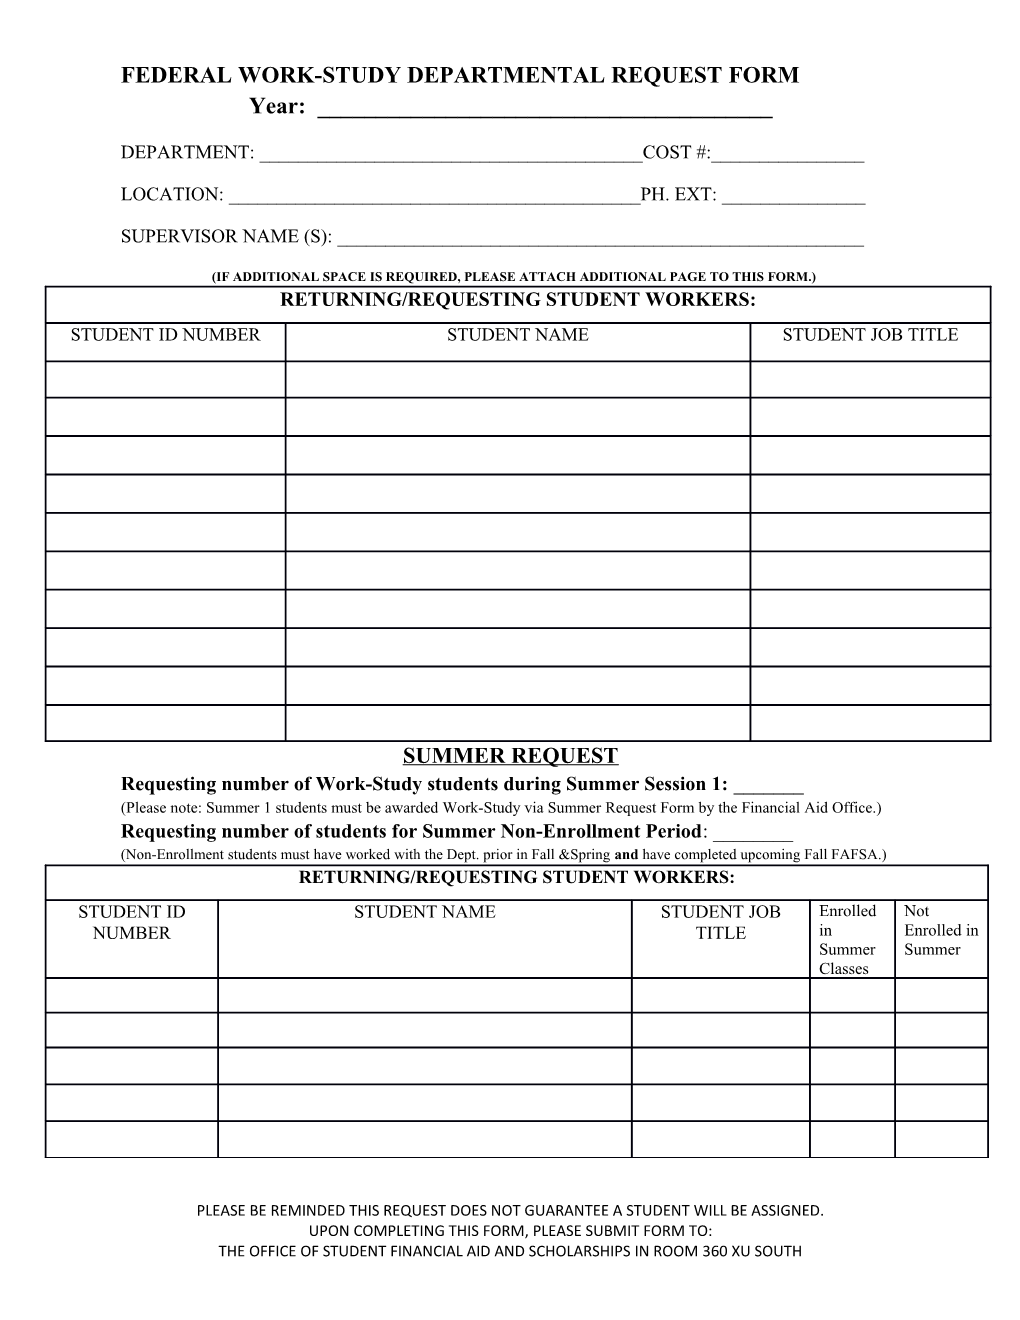 Federal Work-Study Departmental Request Form